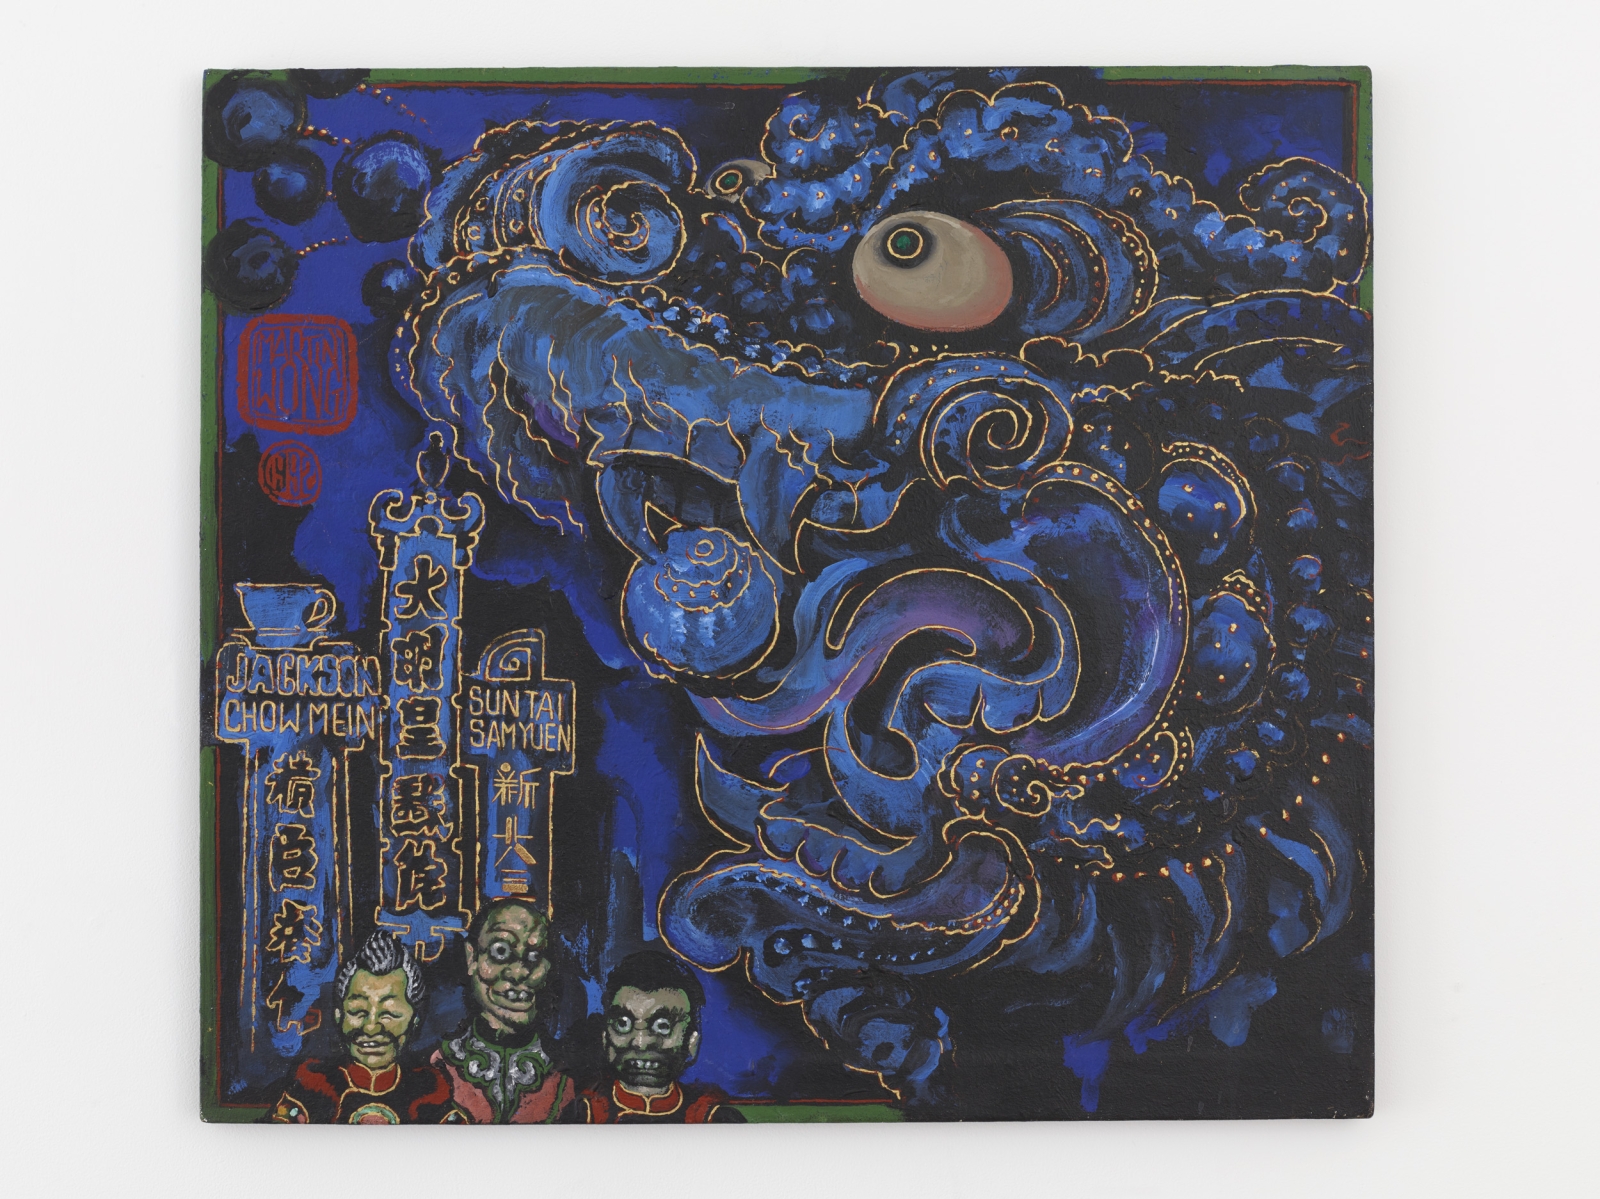 Martin Wong
Jackson Chow Mein (Theatre), 1992
acrylic on canvas
26 x 29 in.
66 x 73.7 cm